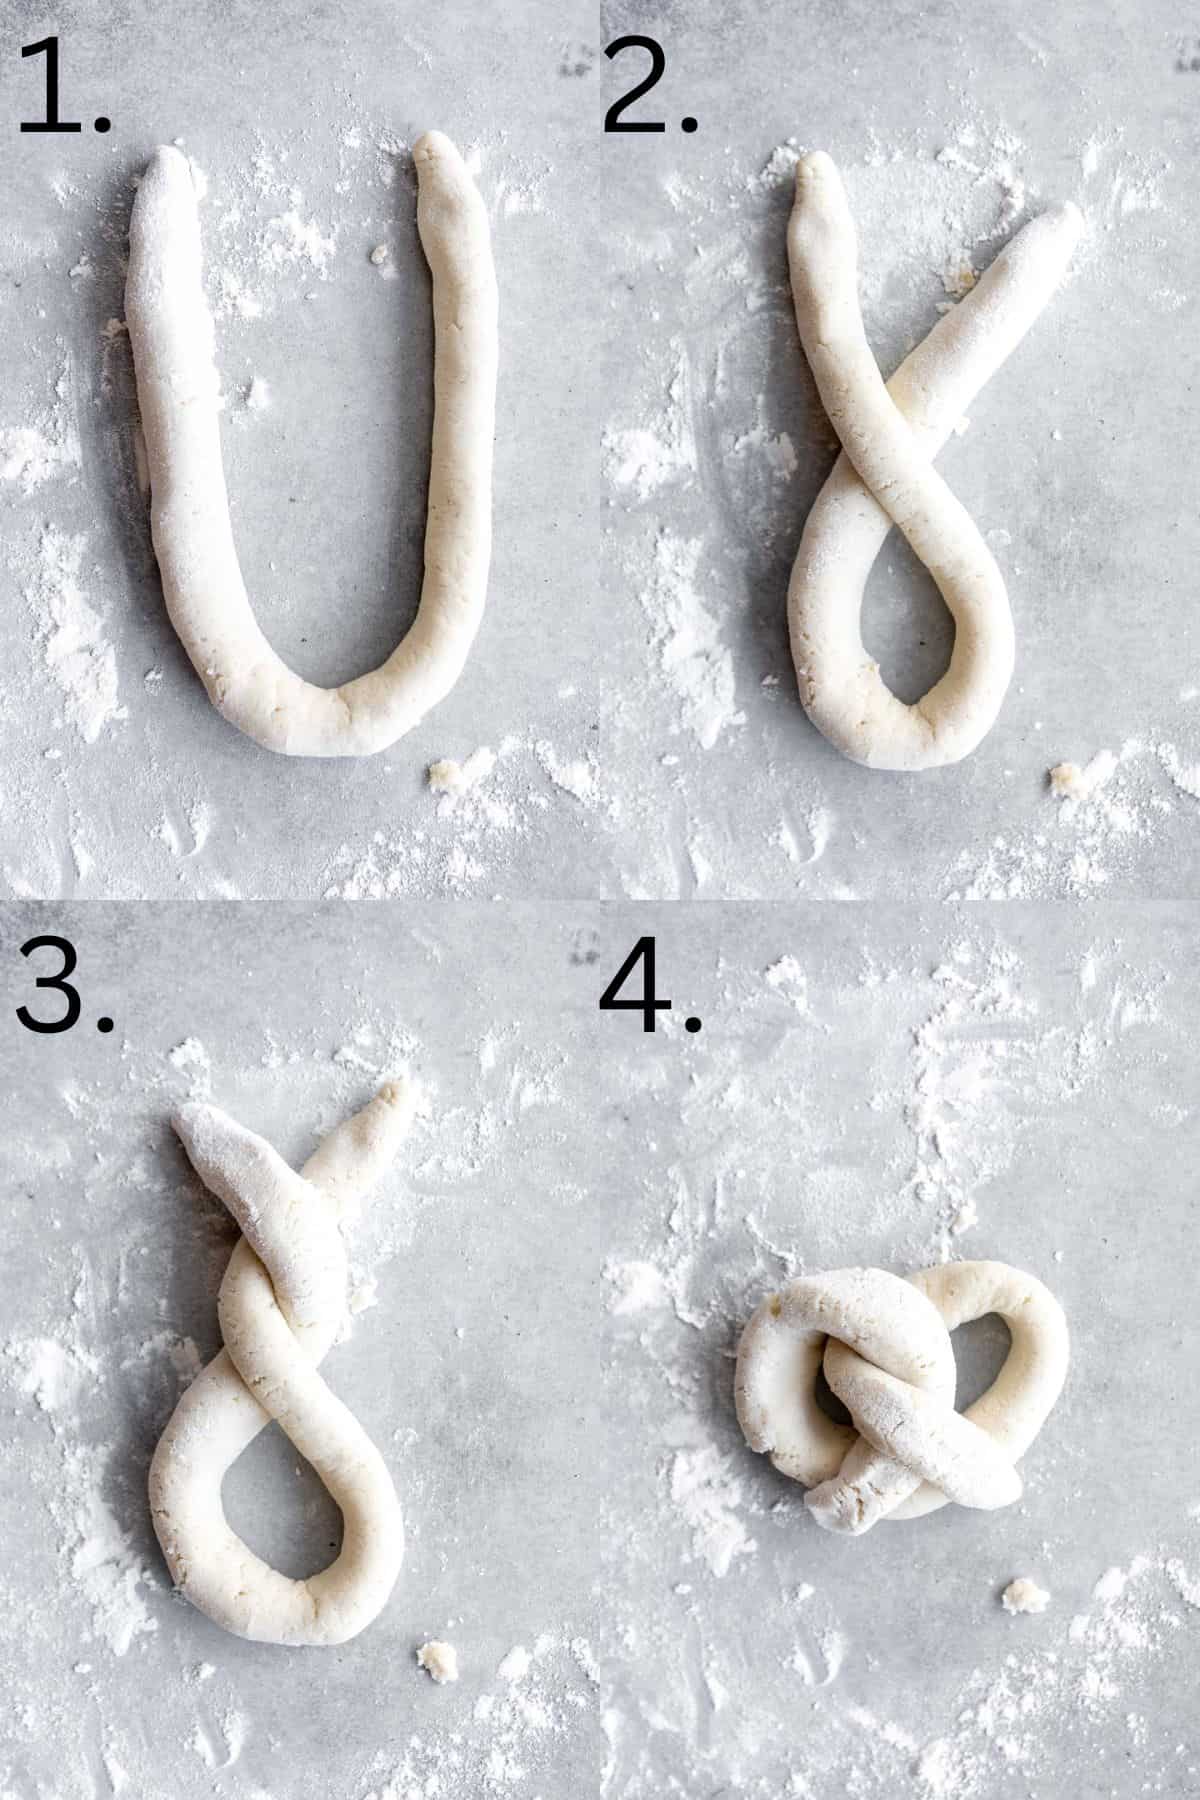 four images showing how to shape the pretzels